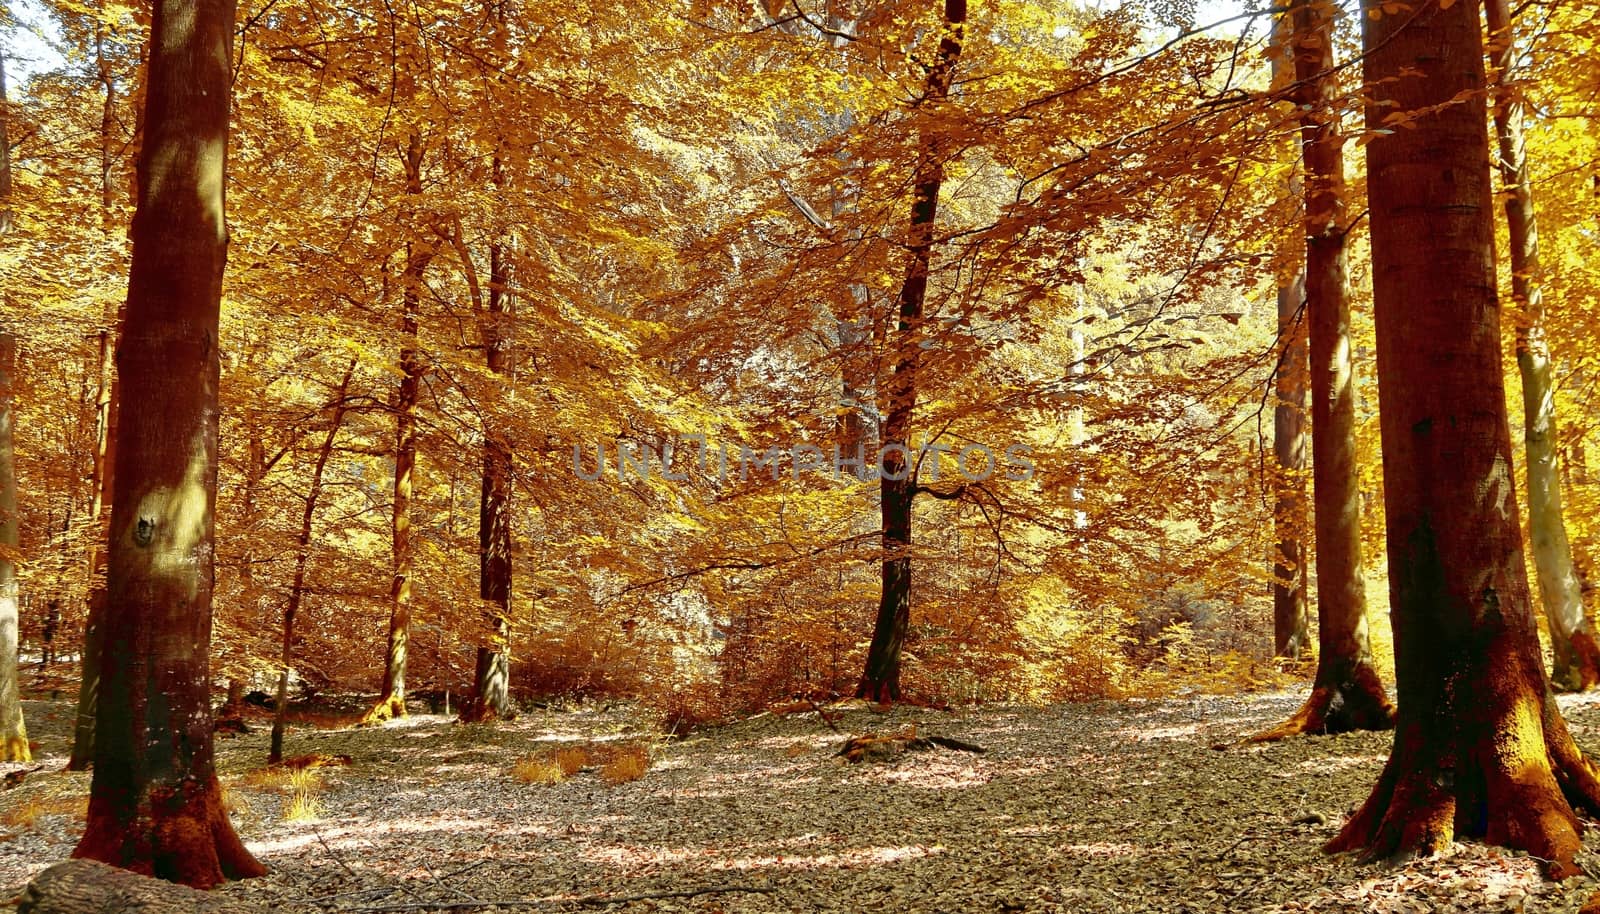 Beautiful panorama view on a golden autumn landscape in the middle of october